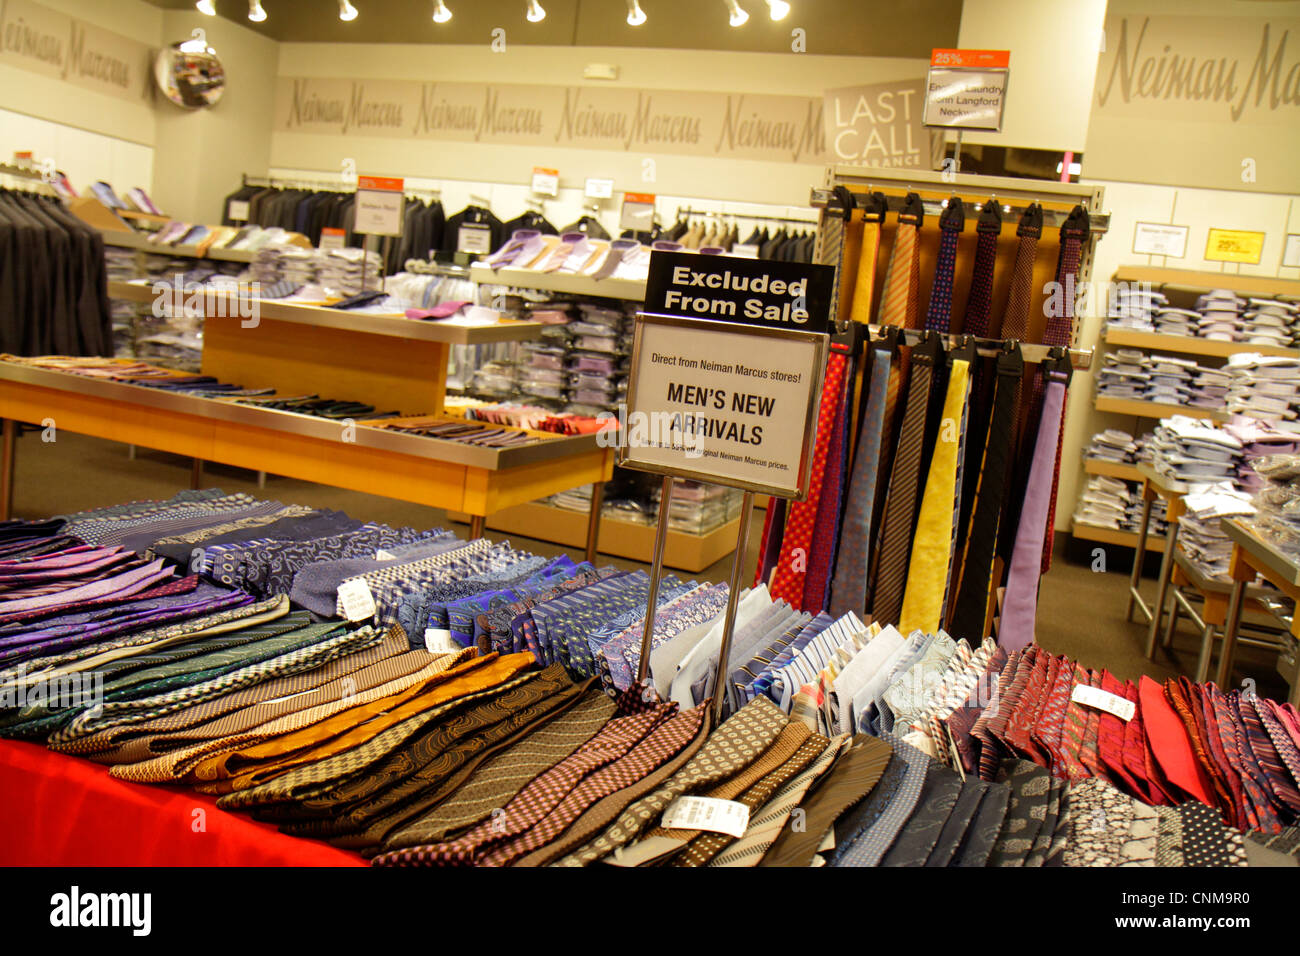 Miami Florida,Sweetwater,Dolphin mall,Neiman Marcus,Last Call Clearance Center,centre,man's,men's,ties,display case sale,luxury,FL120311383 Stock Photo